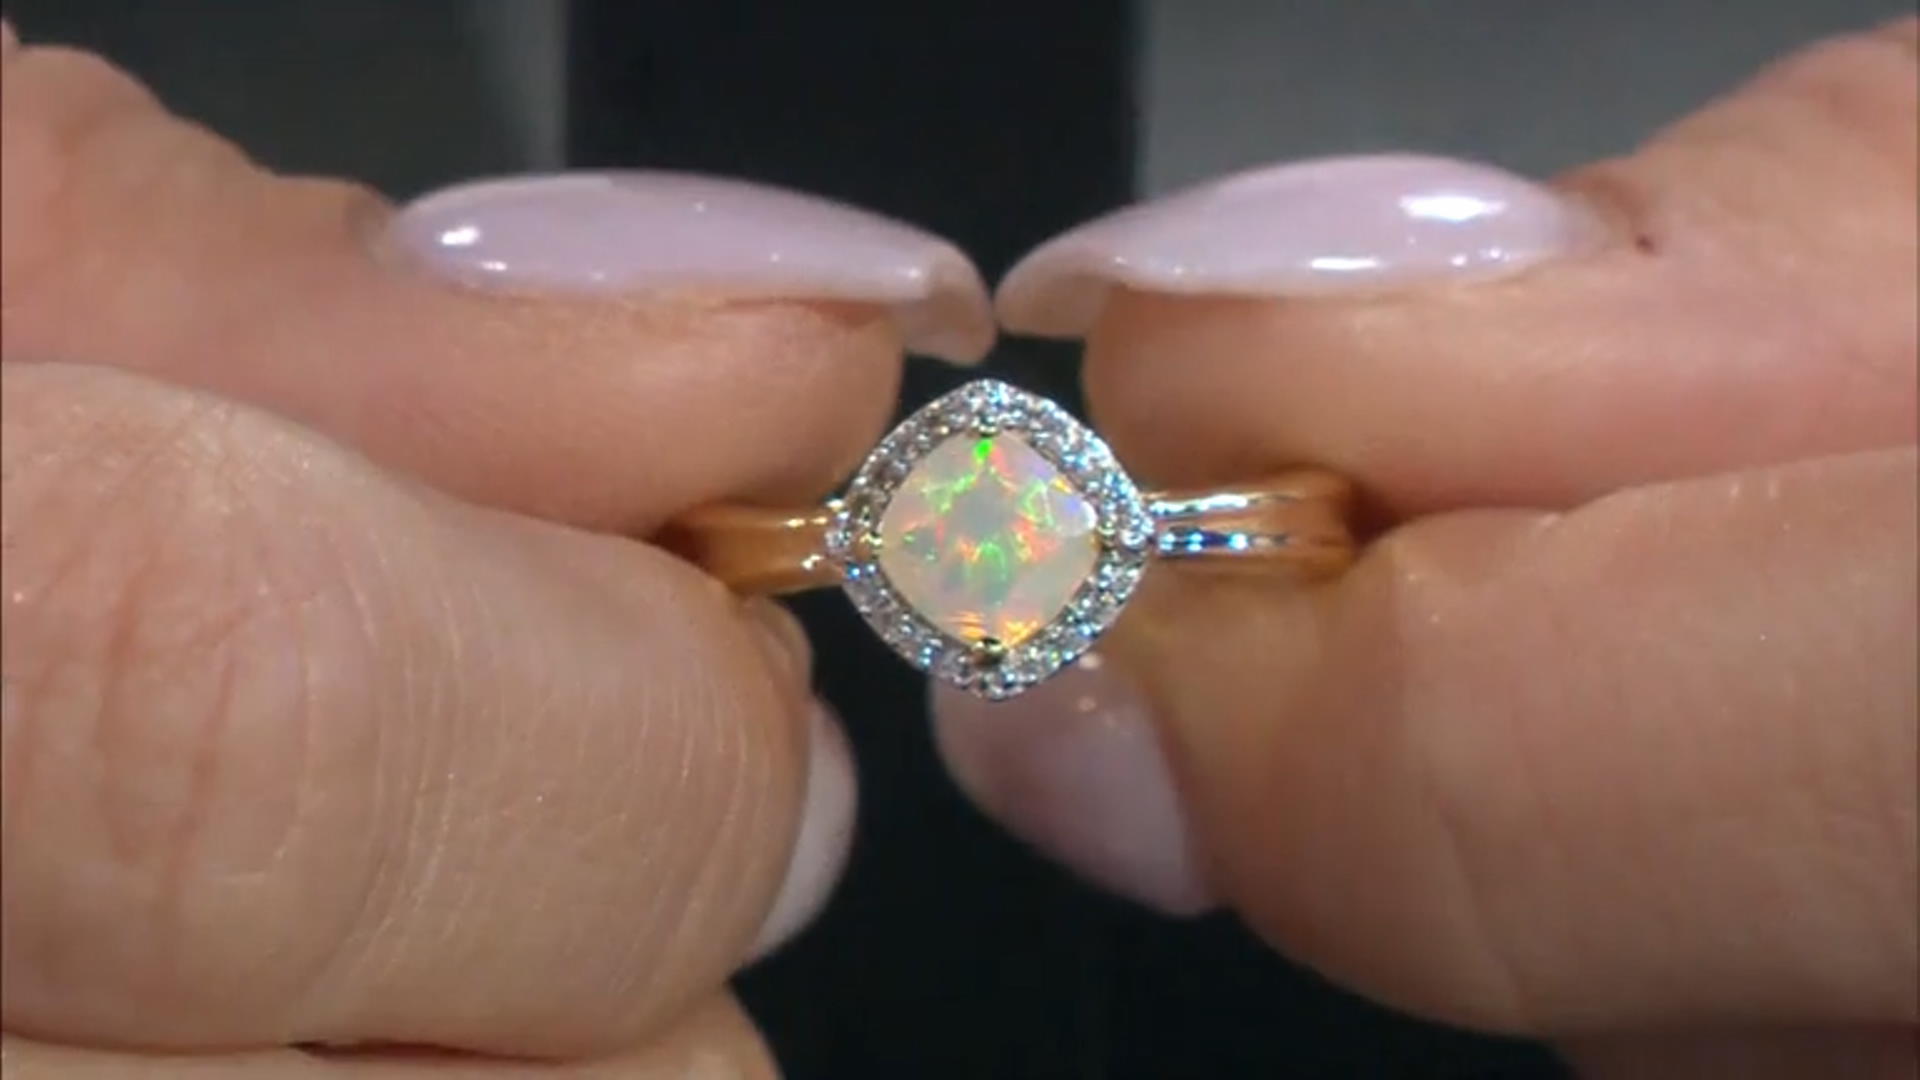 White Ethiopian Opal 18k Yellow Gold Over Sterling Silver Ring 0.55ctw Video Thumbnail